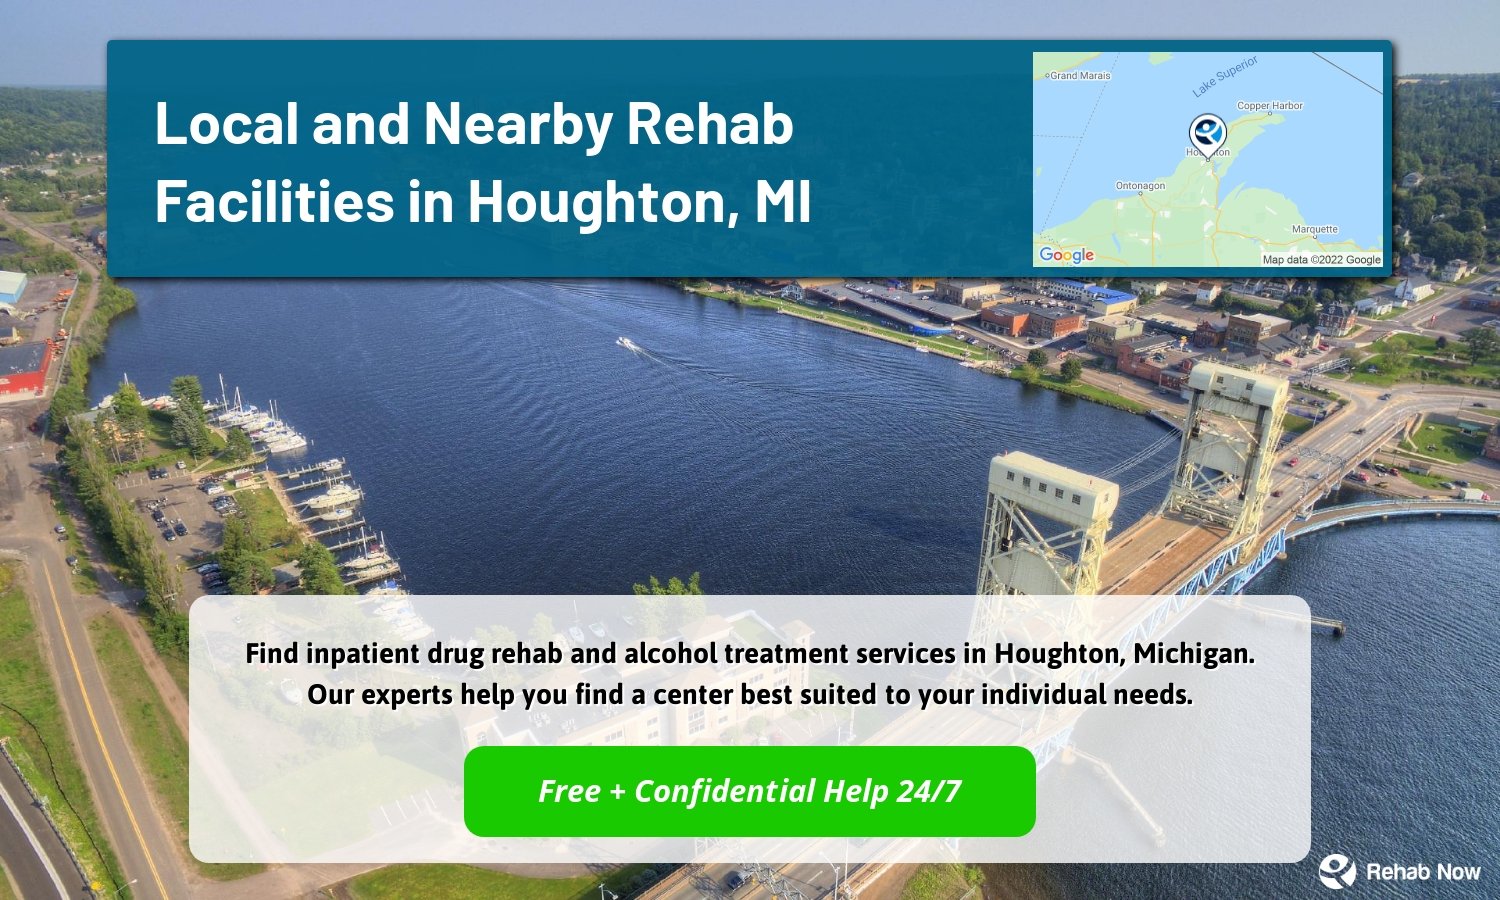 Find inpatient drug rehab and alcohol treatment services in Houghton, Michigan. Our experts help you find a center best suited to your individual needs.